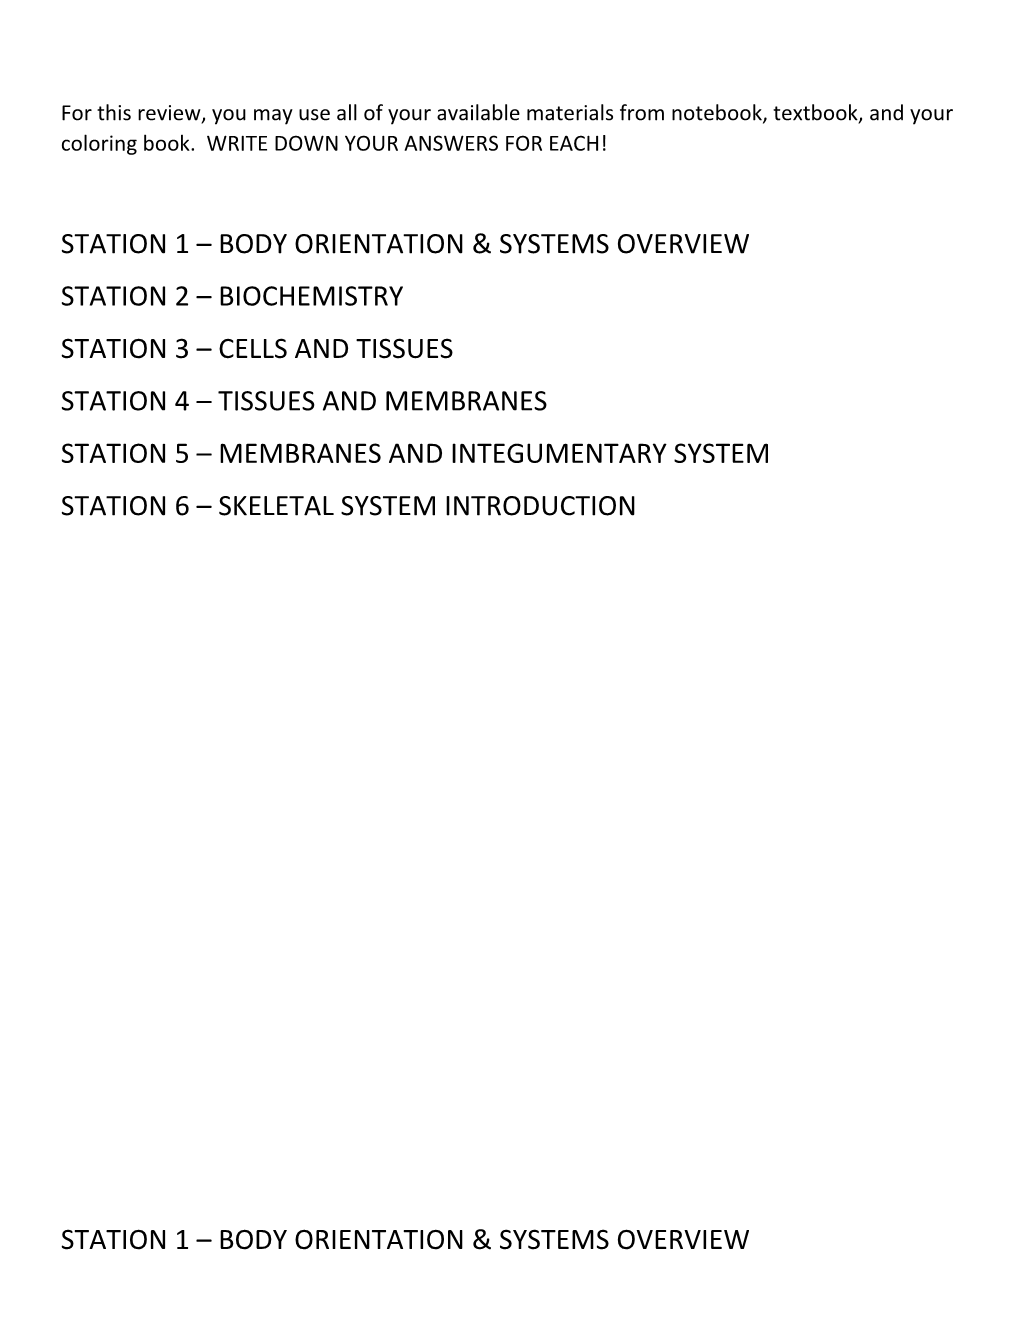 Station 1 Body Orientation & Systems Overview